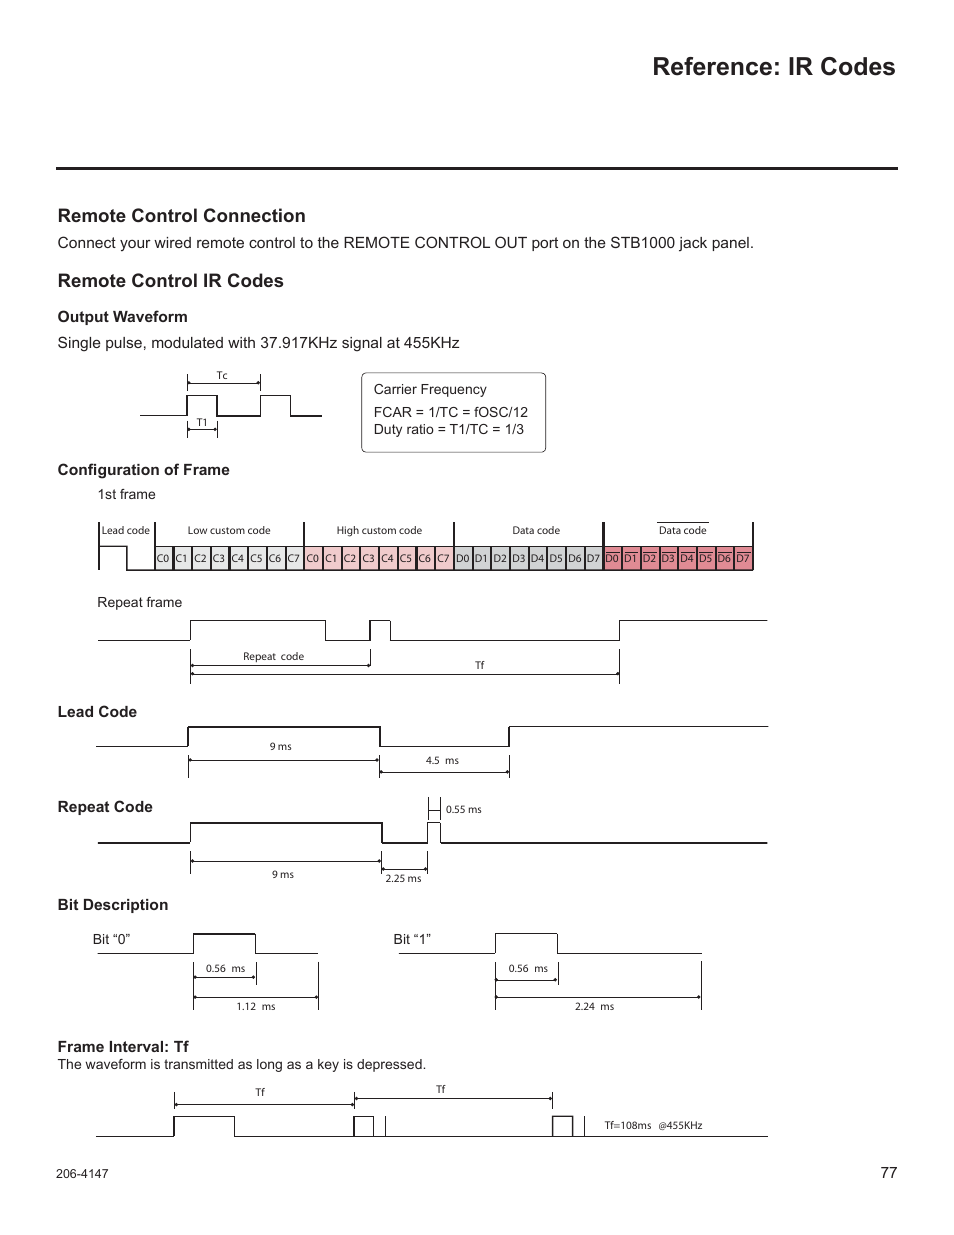 Reference: ir codes, Remote control connection, Remote control ir codes | LG STB1000 User Manual | Page 77 / 86